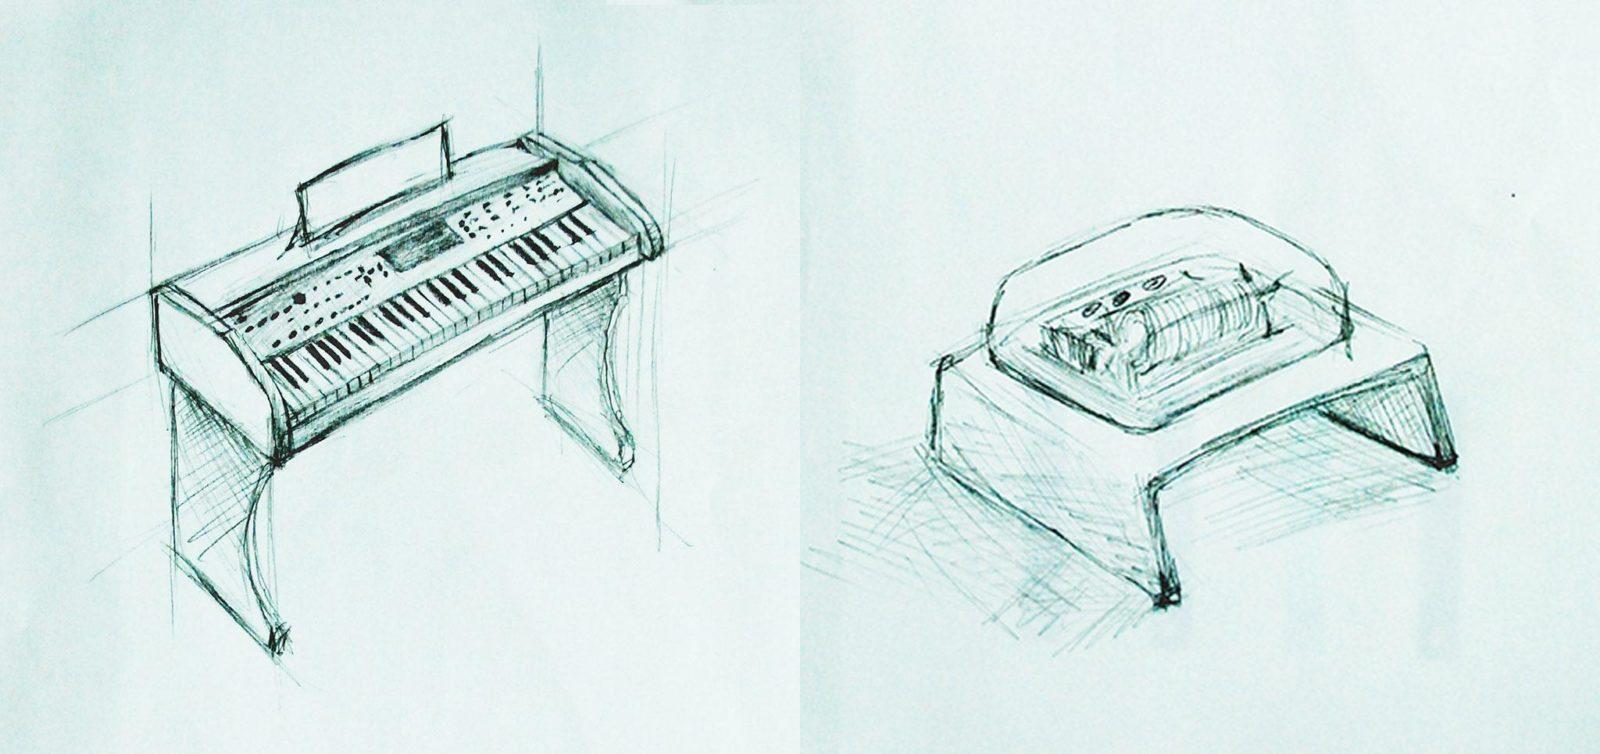 the prototype of programmable music box Muro Box was inspired by the shape of an electronic piano.